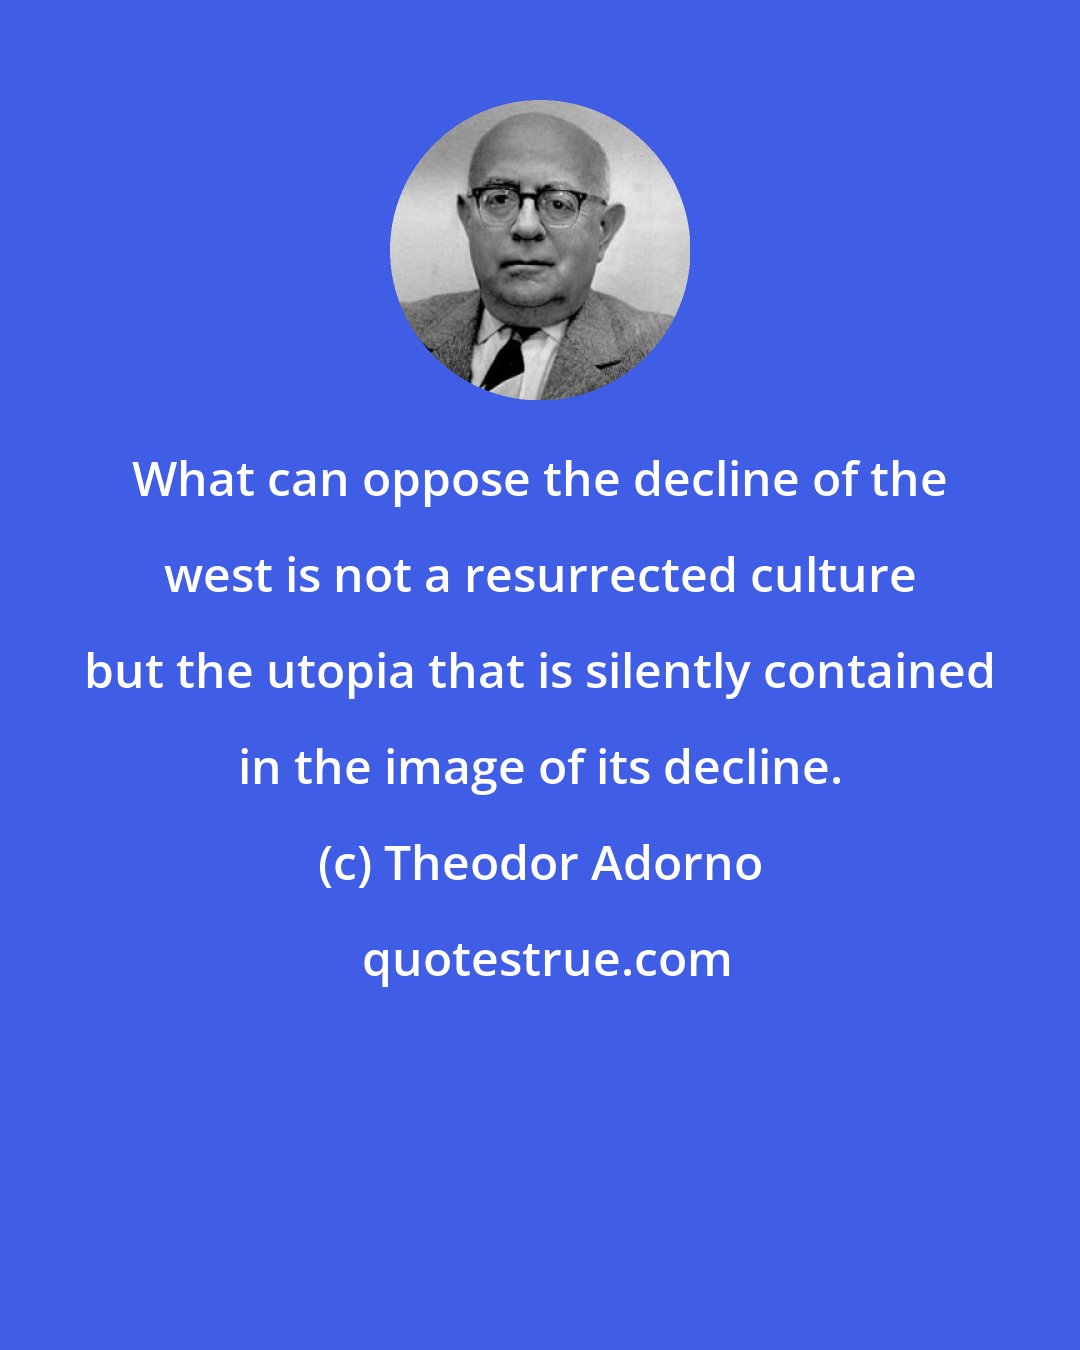 Theodor Adorno: What can oppose the decline of the west is not a resurrected culture but the utopia that is silently contained in the image of its decline.